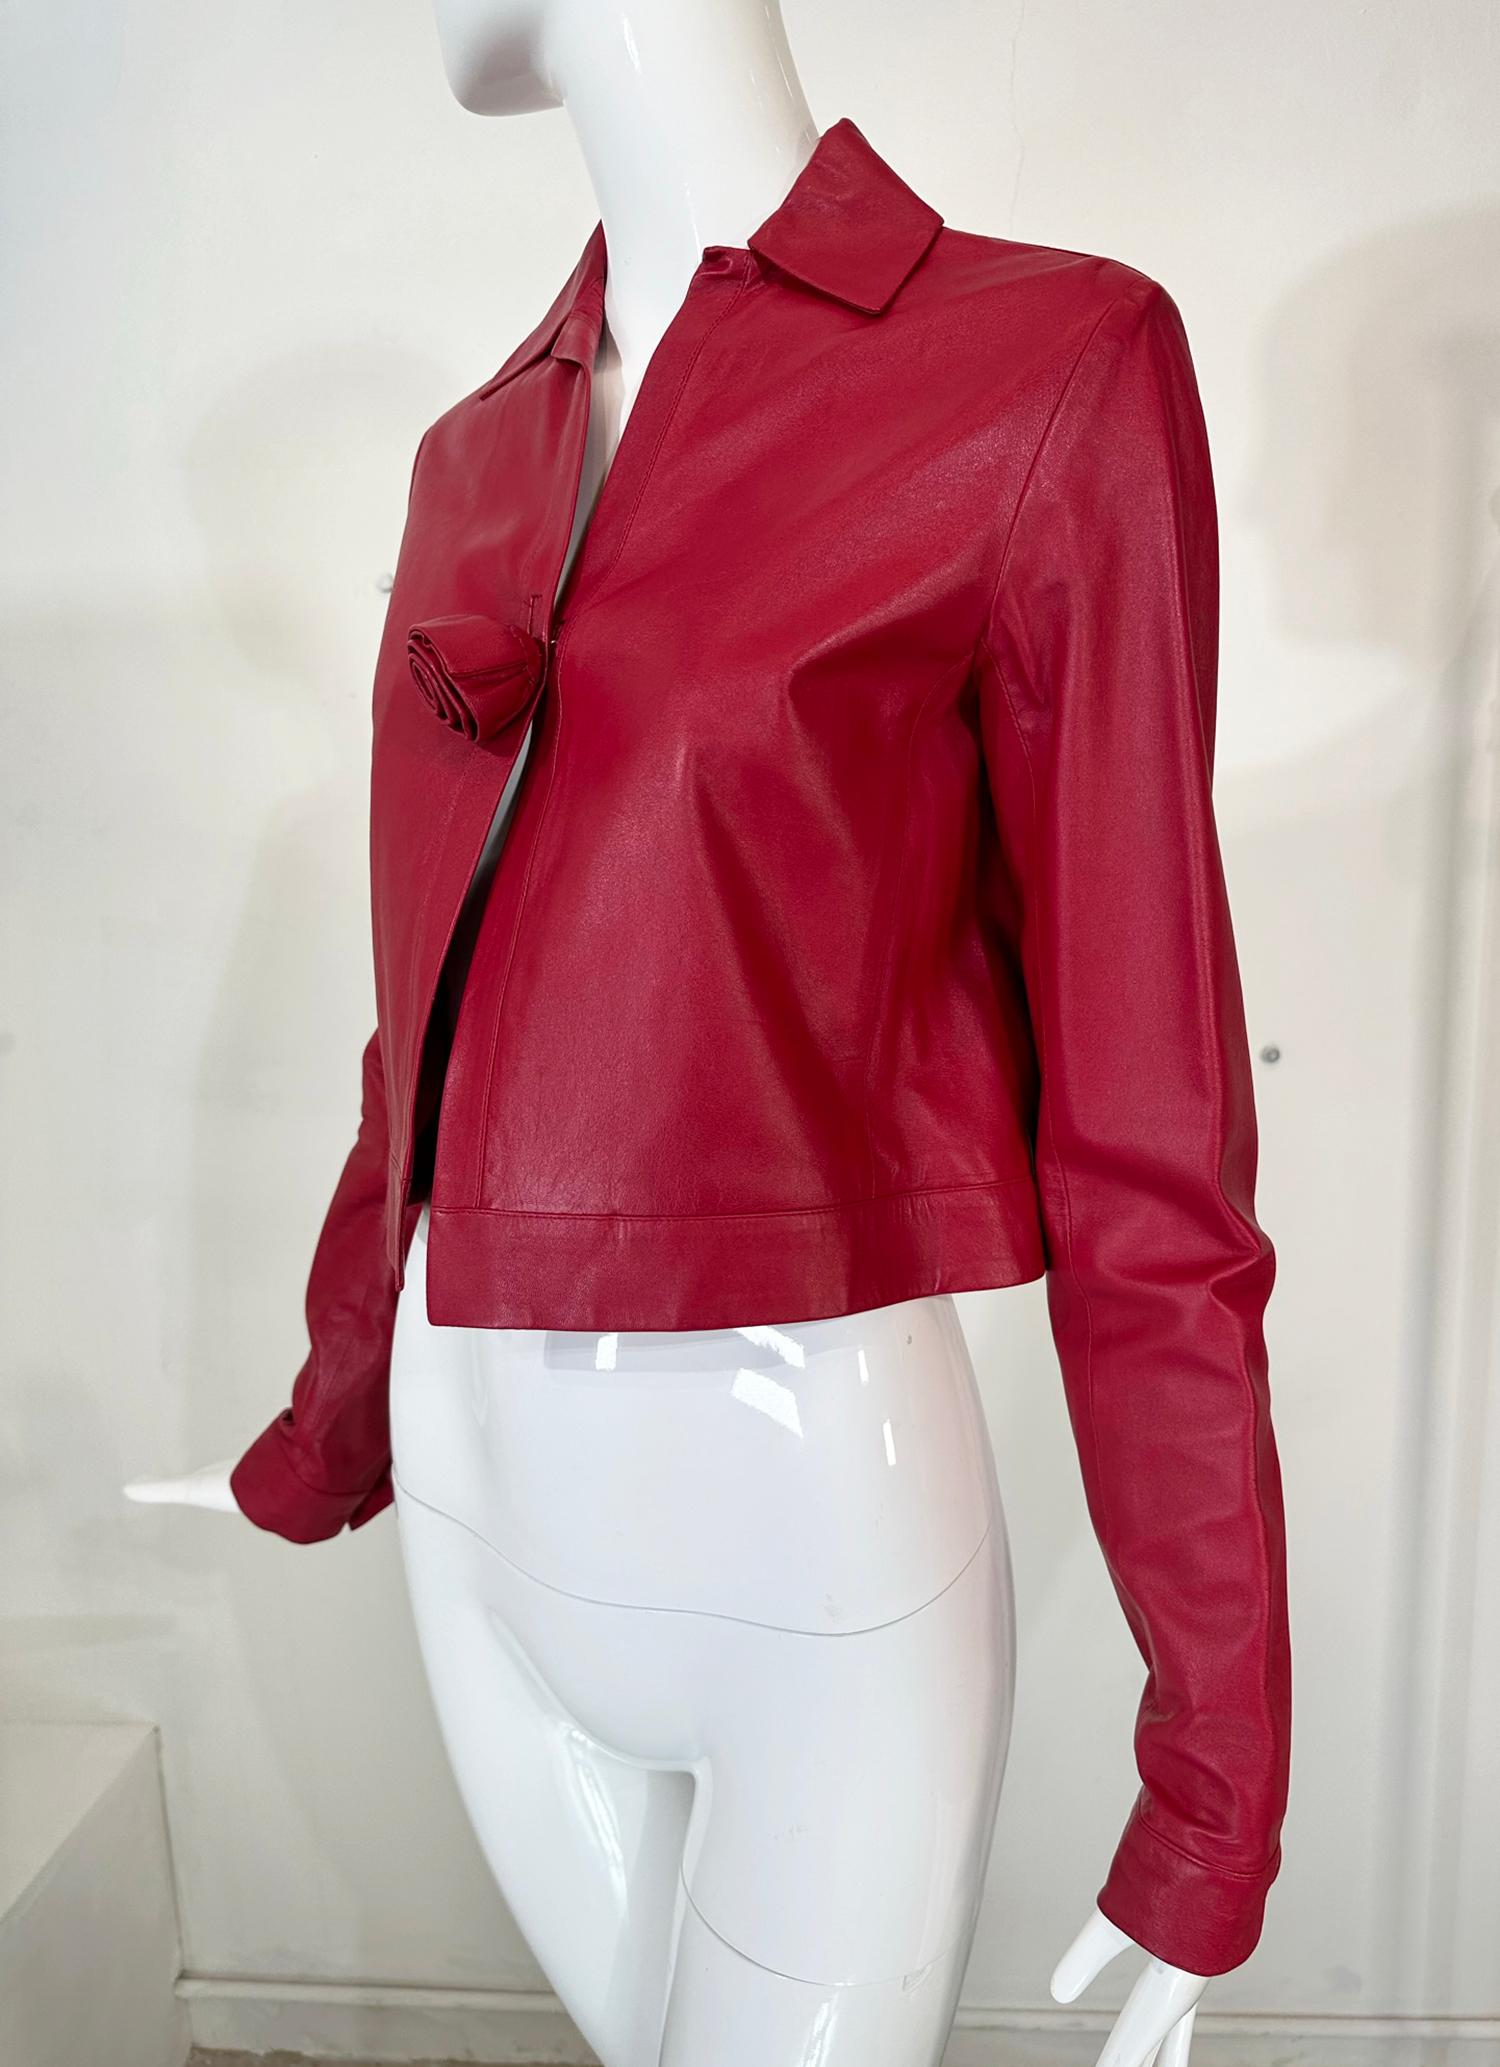 Romeo Gigli Buttery Soft Garnet Leather Cropped Rose Button Spencer Jacket   5